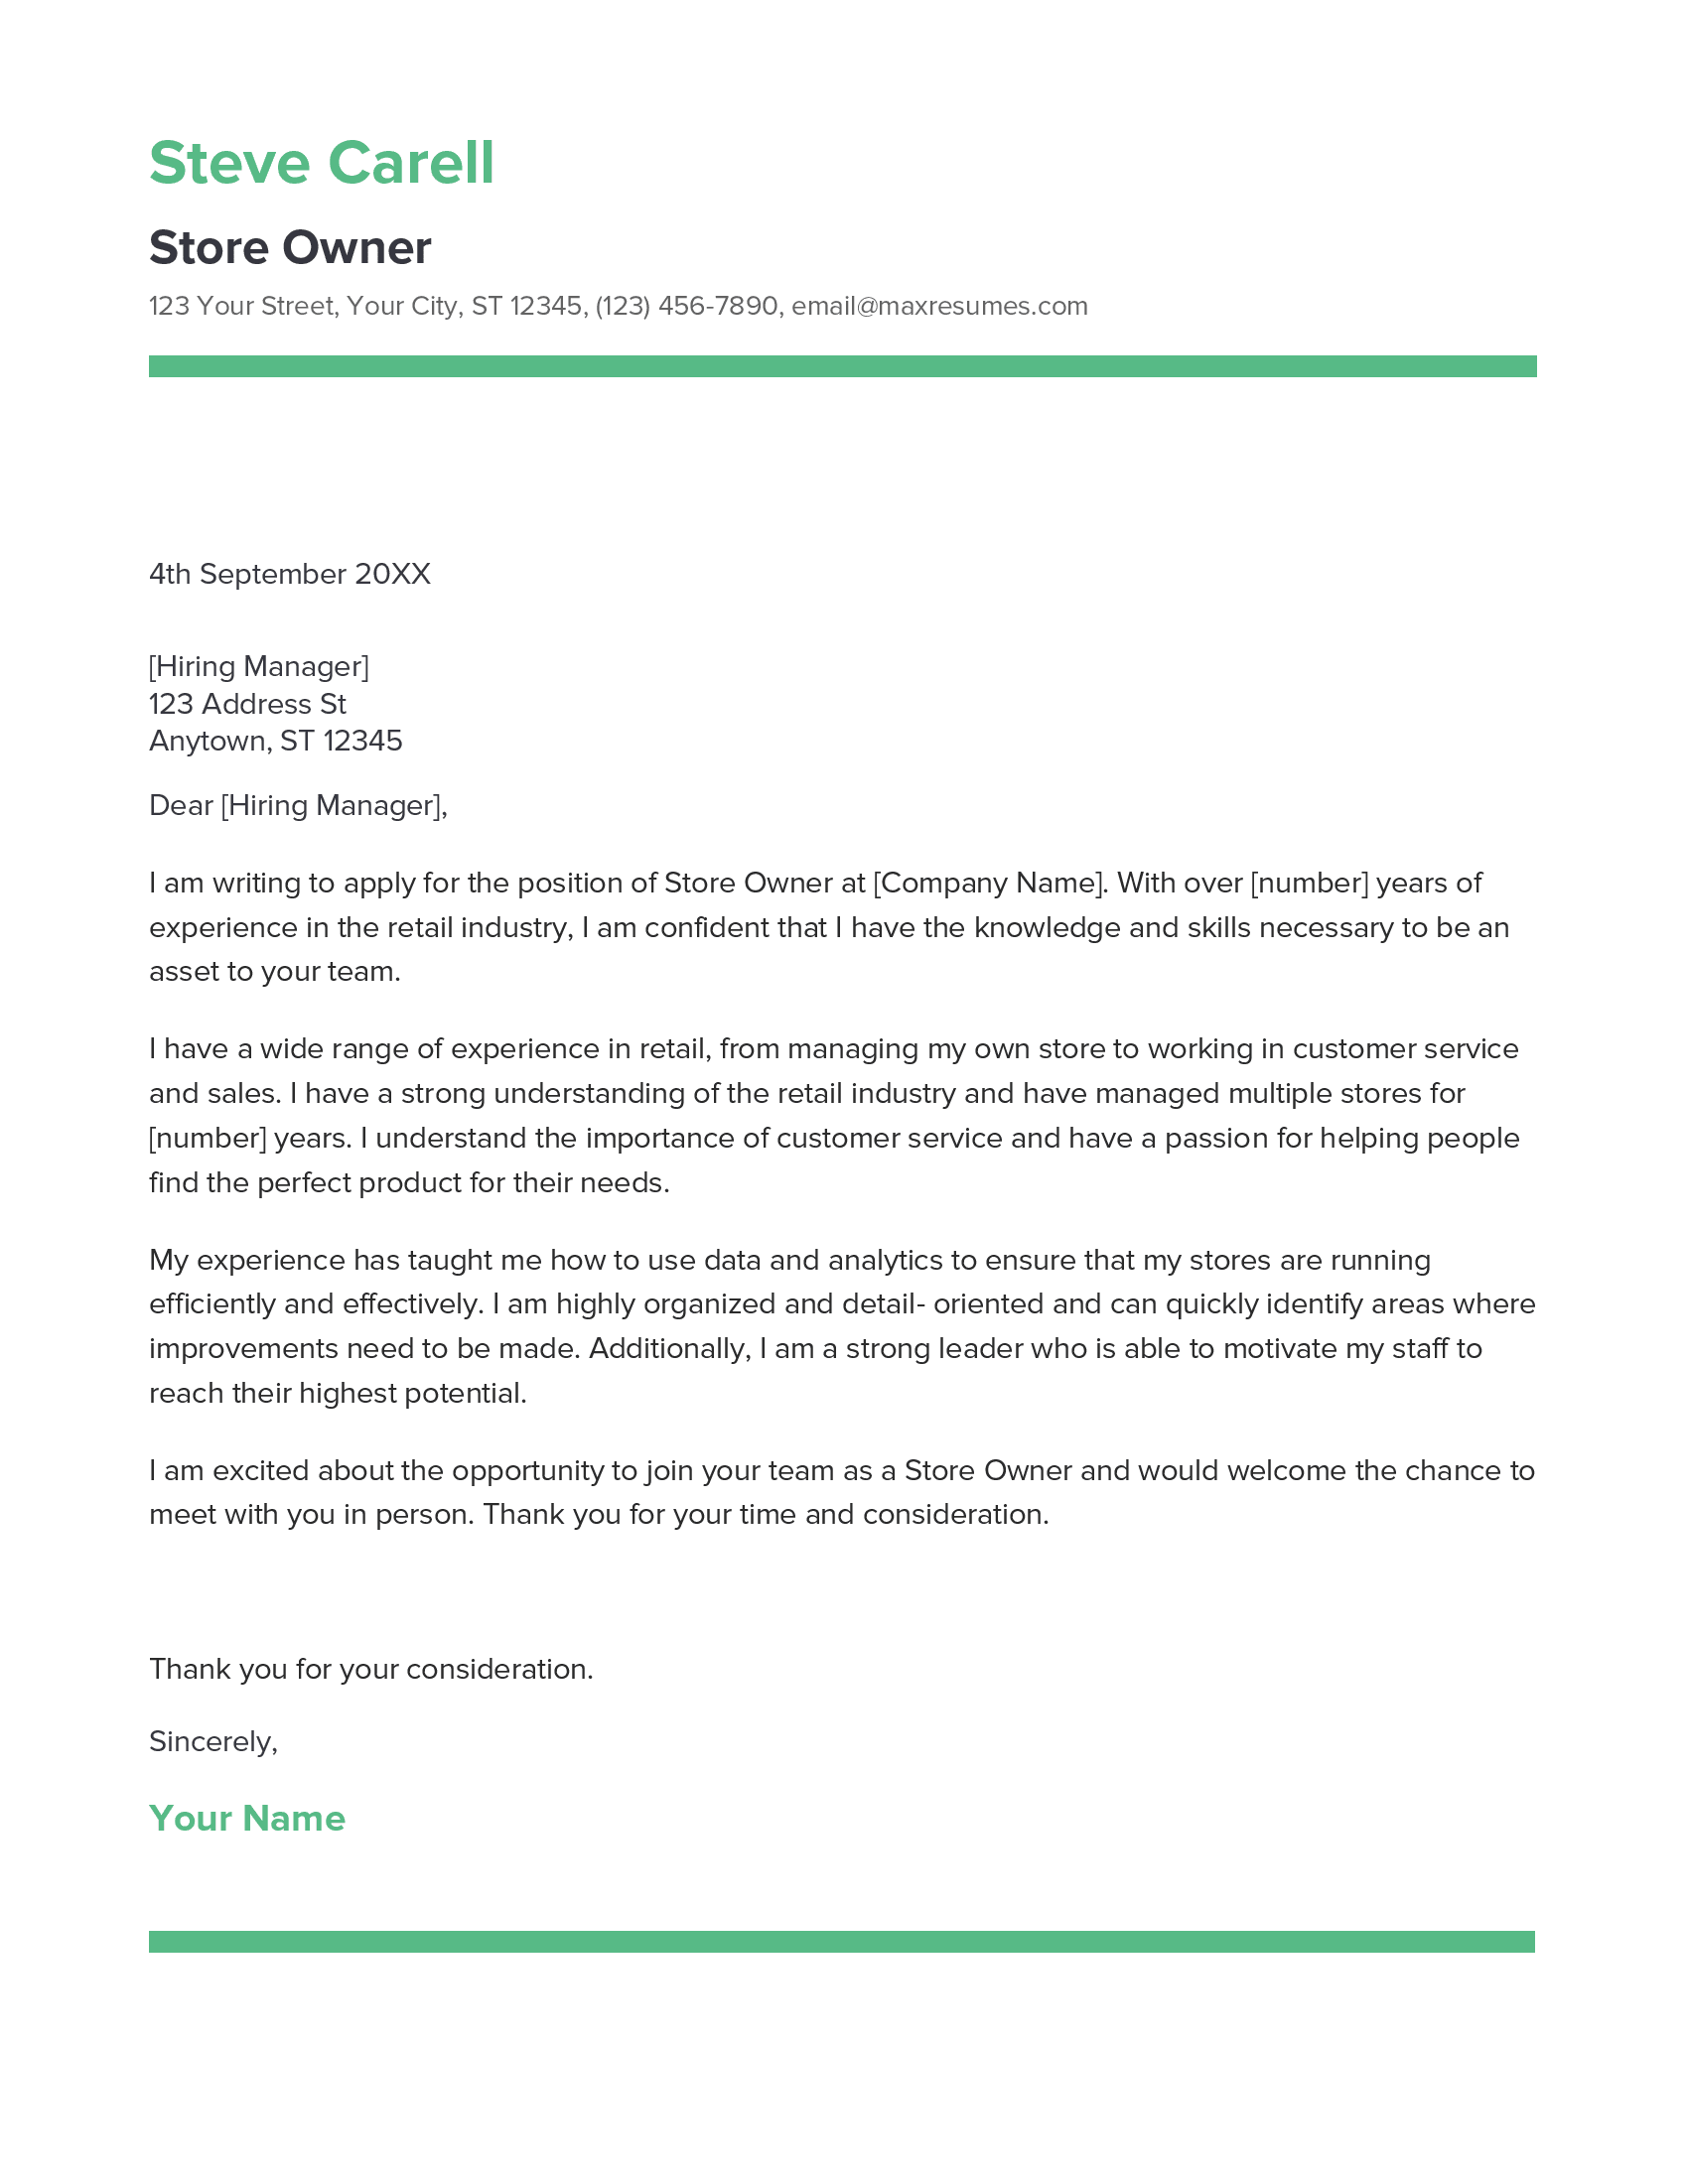 Store Owner Cover Letter Example